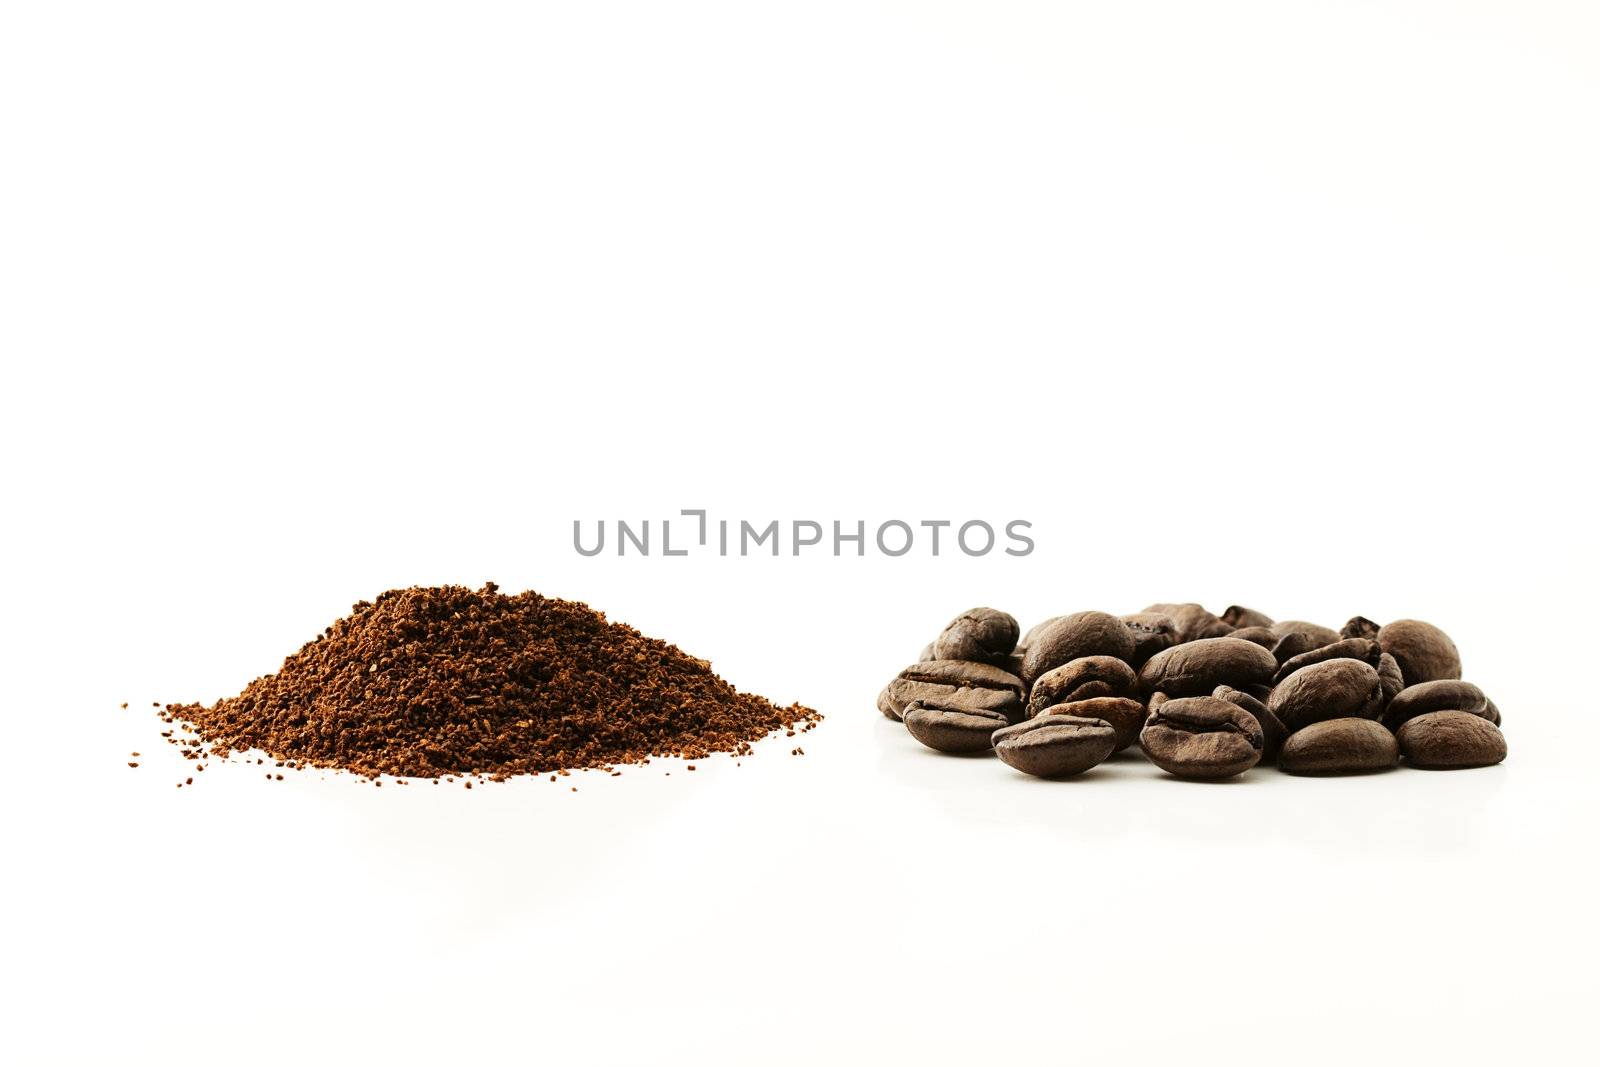 some coffee beans and coffee grain on white background